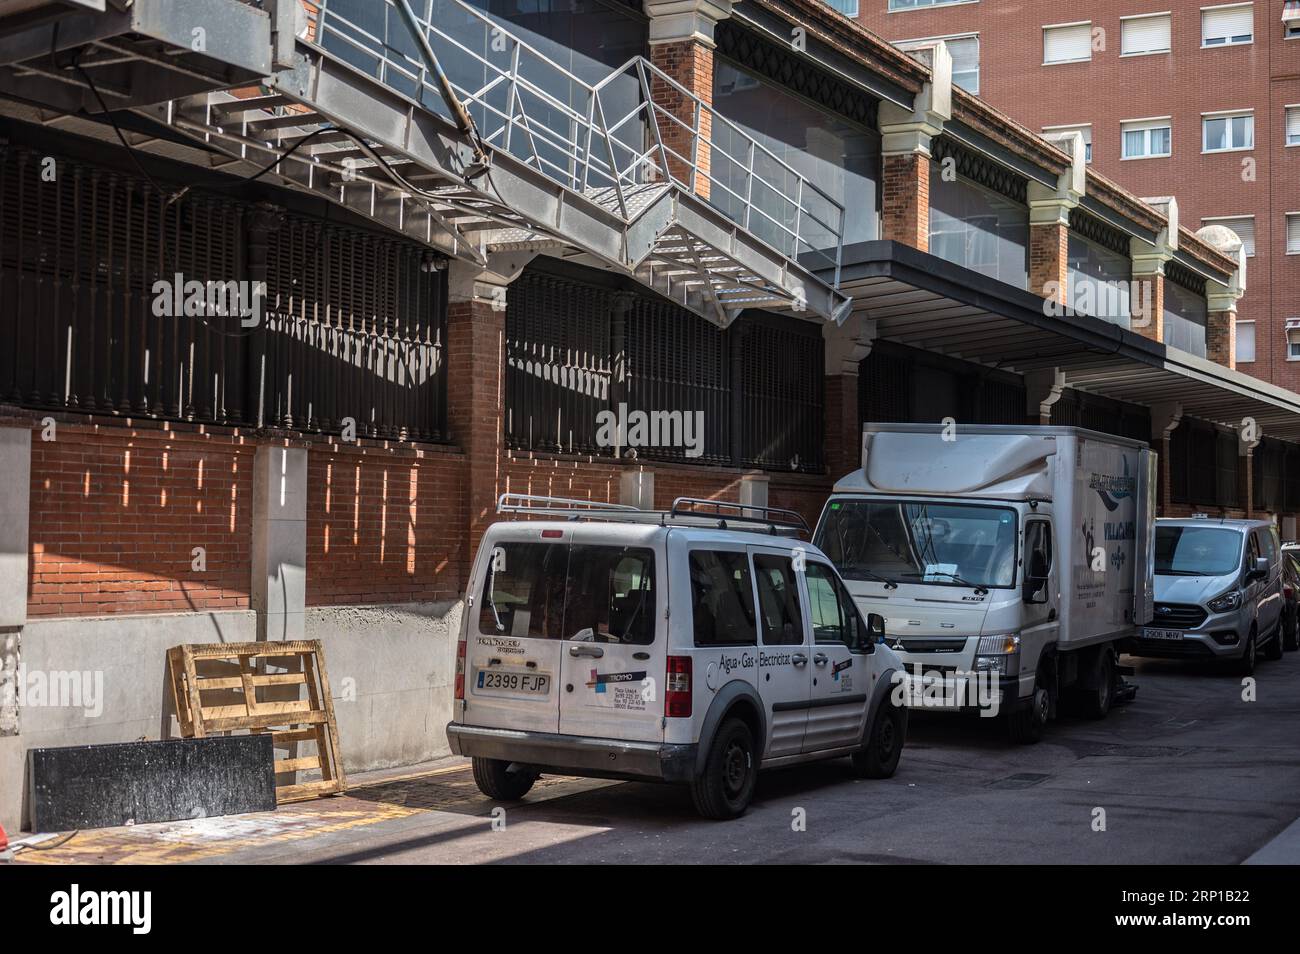 A dark alleyway at the back of the market, the vans and trucks unloaded and parked Stock Photo